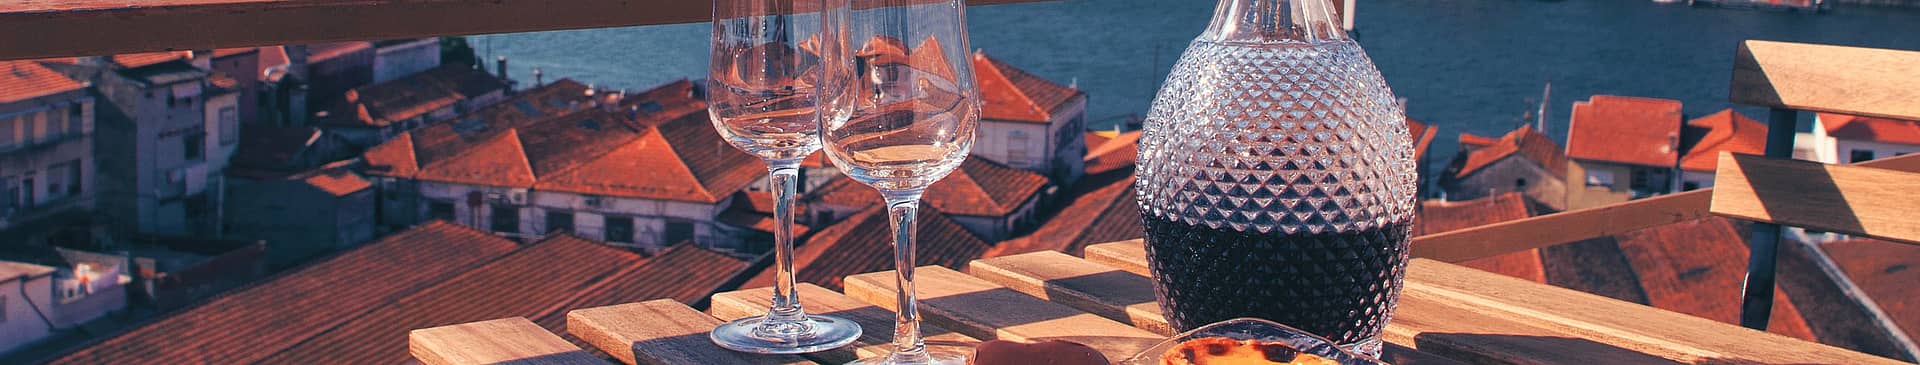 Portugal food and wine tours